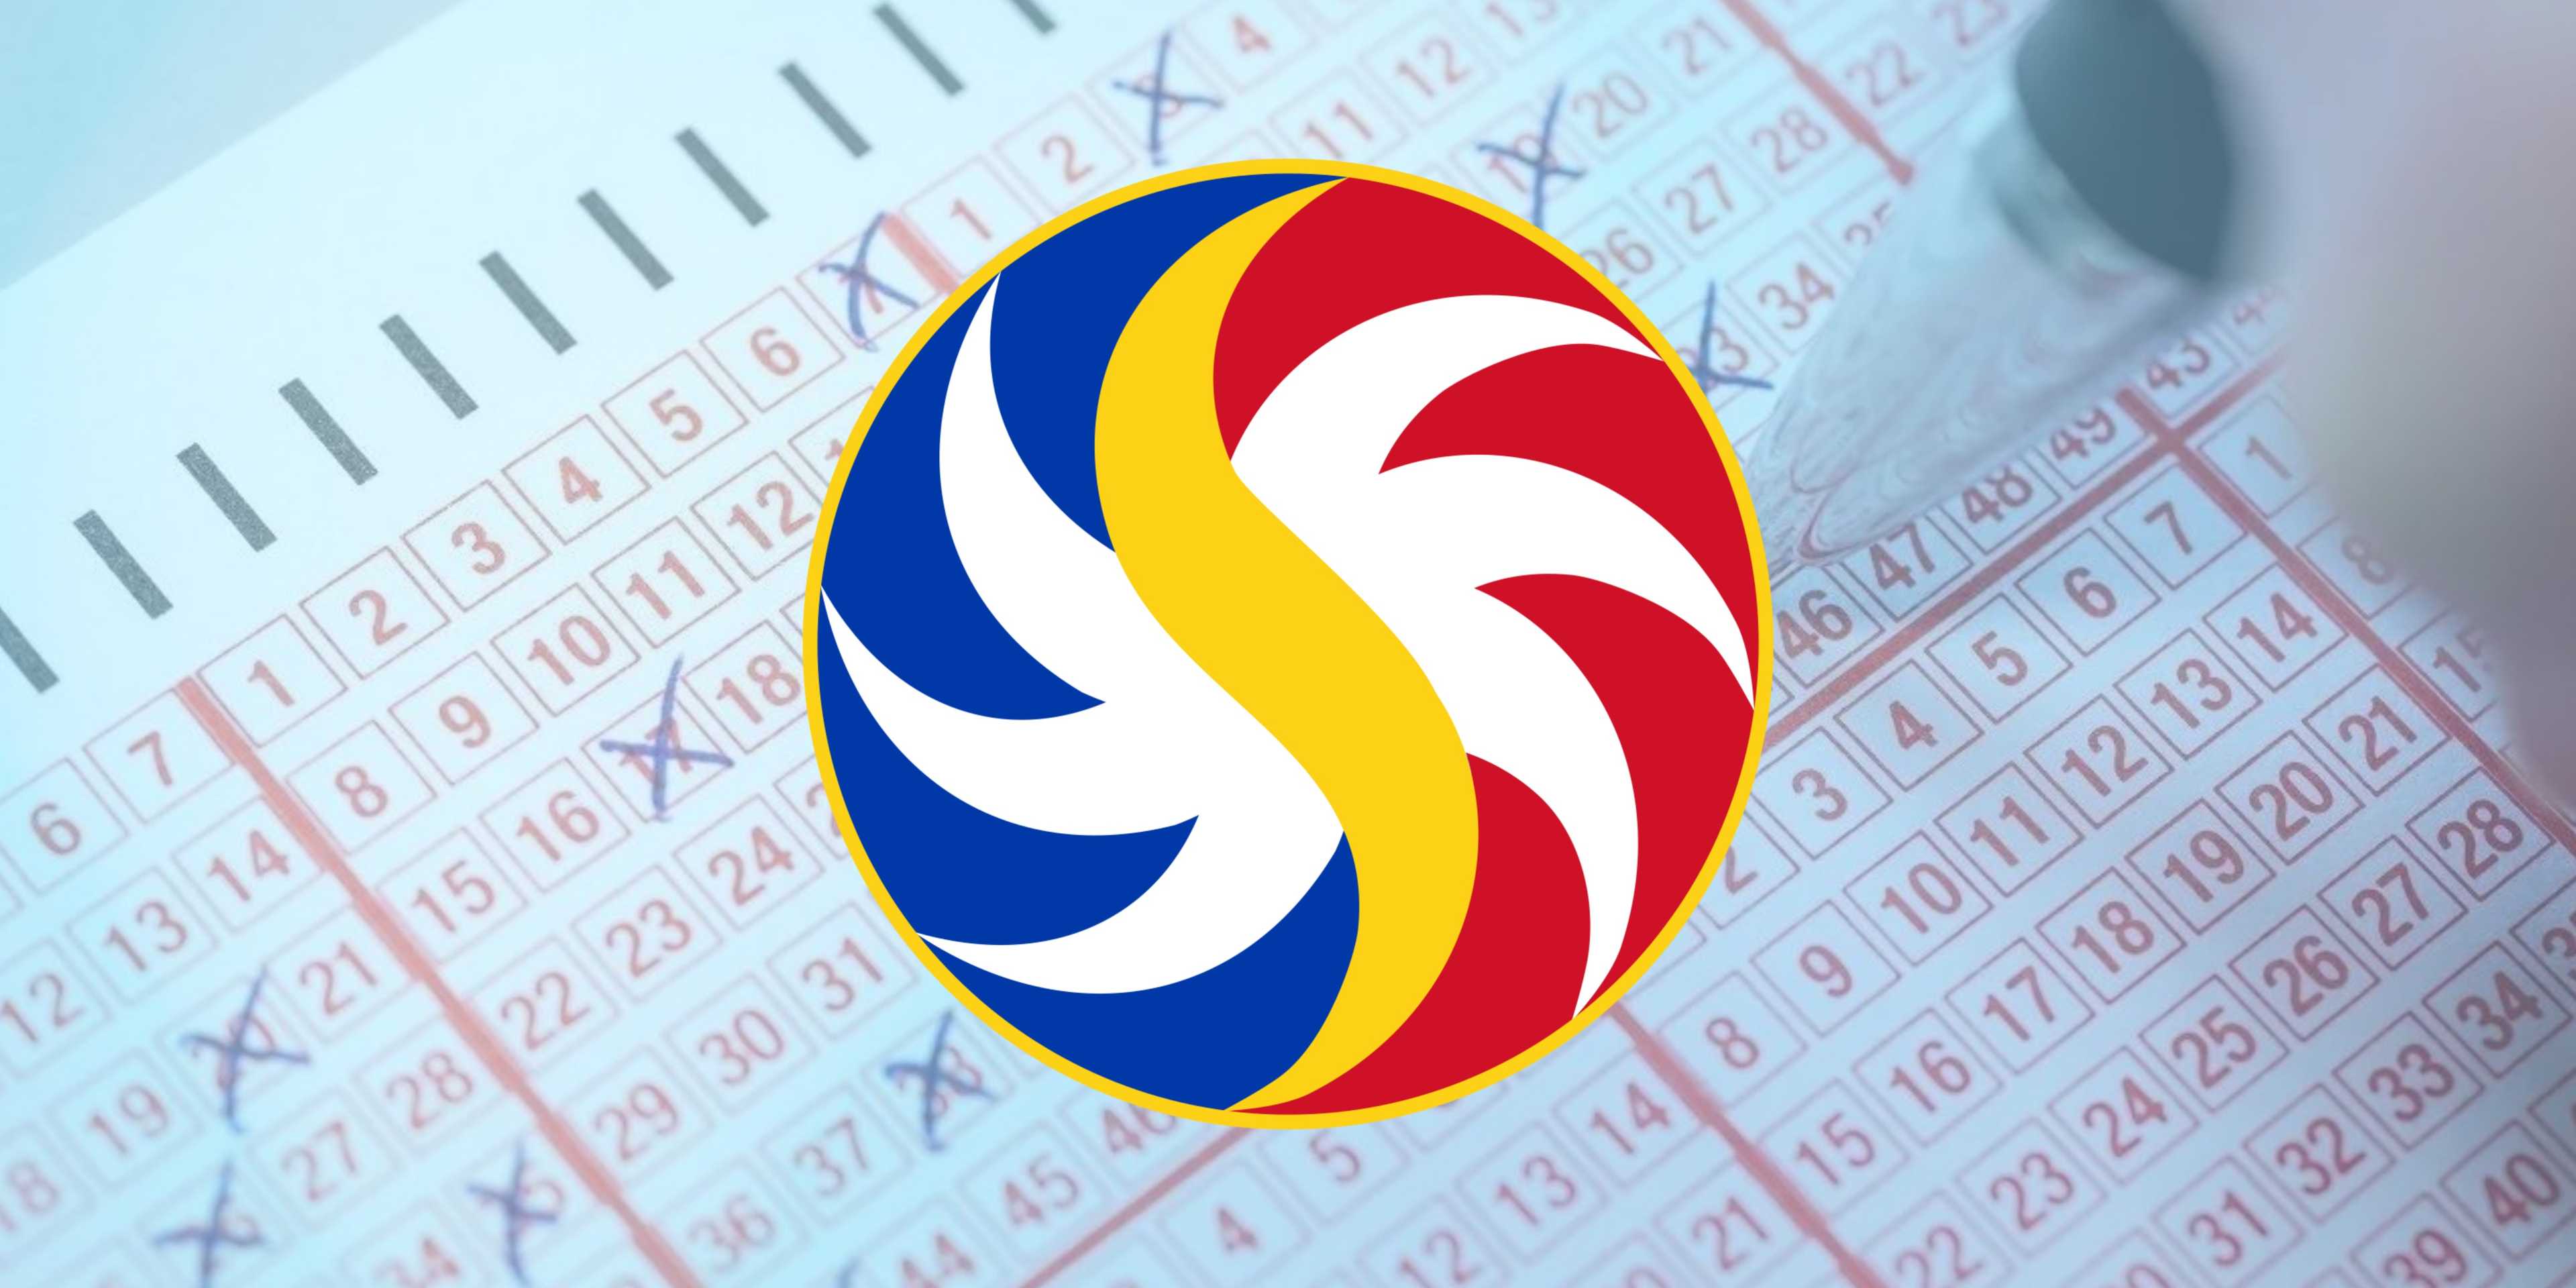 PCSO Lotto Draw Results on Saturday, March 2